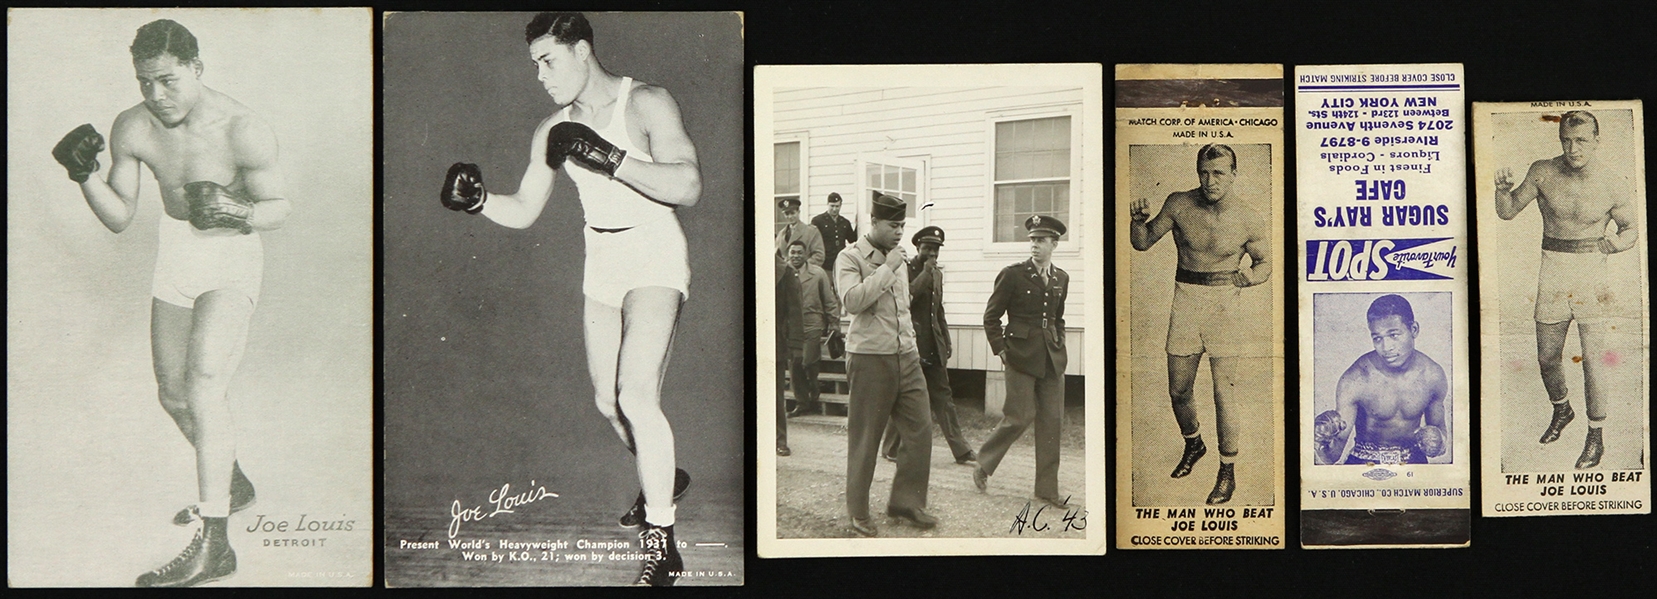 1930s-1950s Joe Louis 3"x 5" Cards, Photo, and Match Books (Lot of 6)